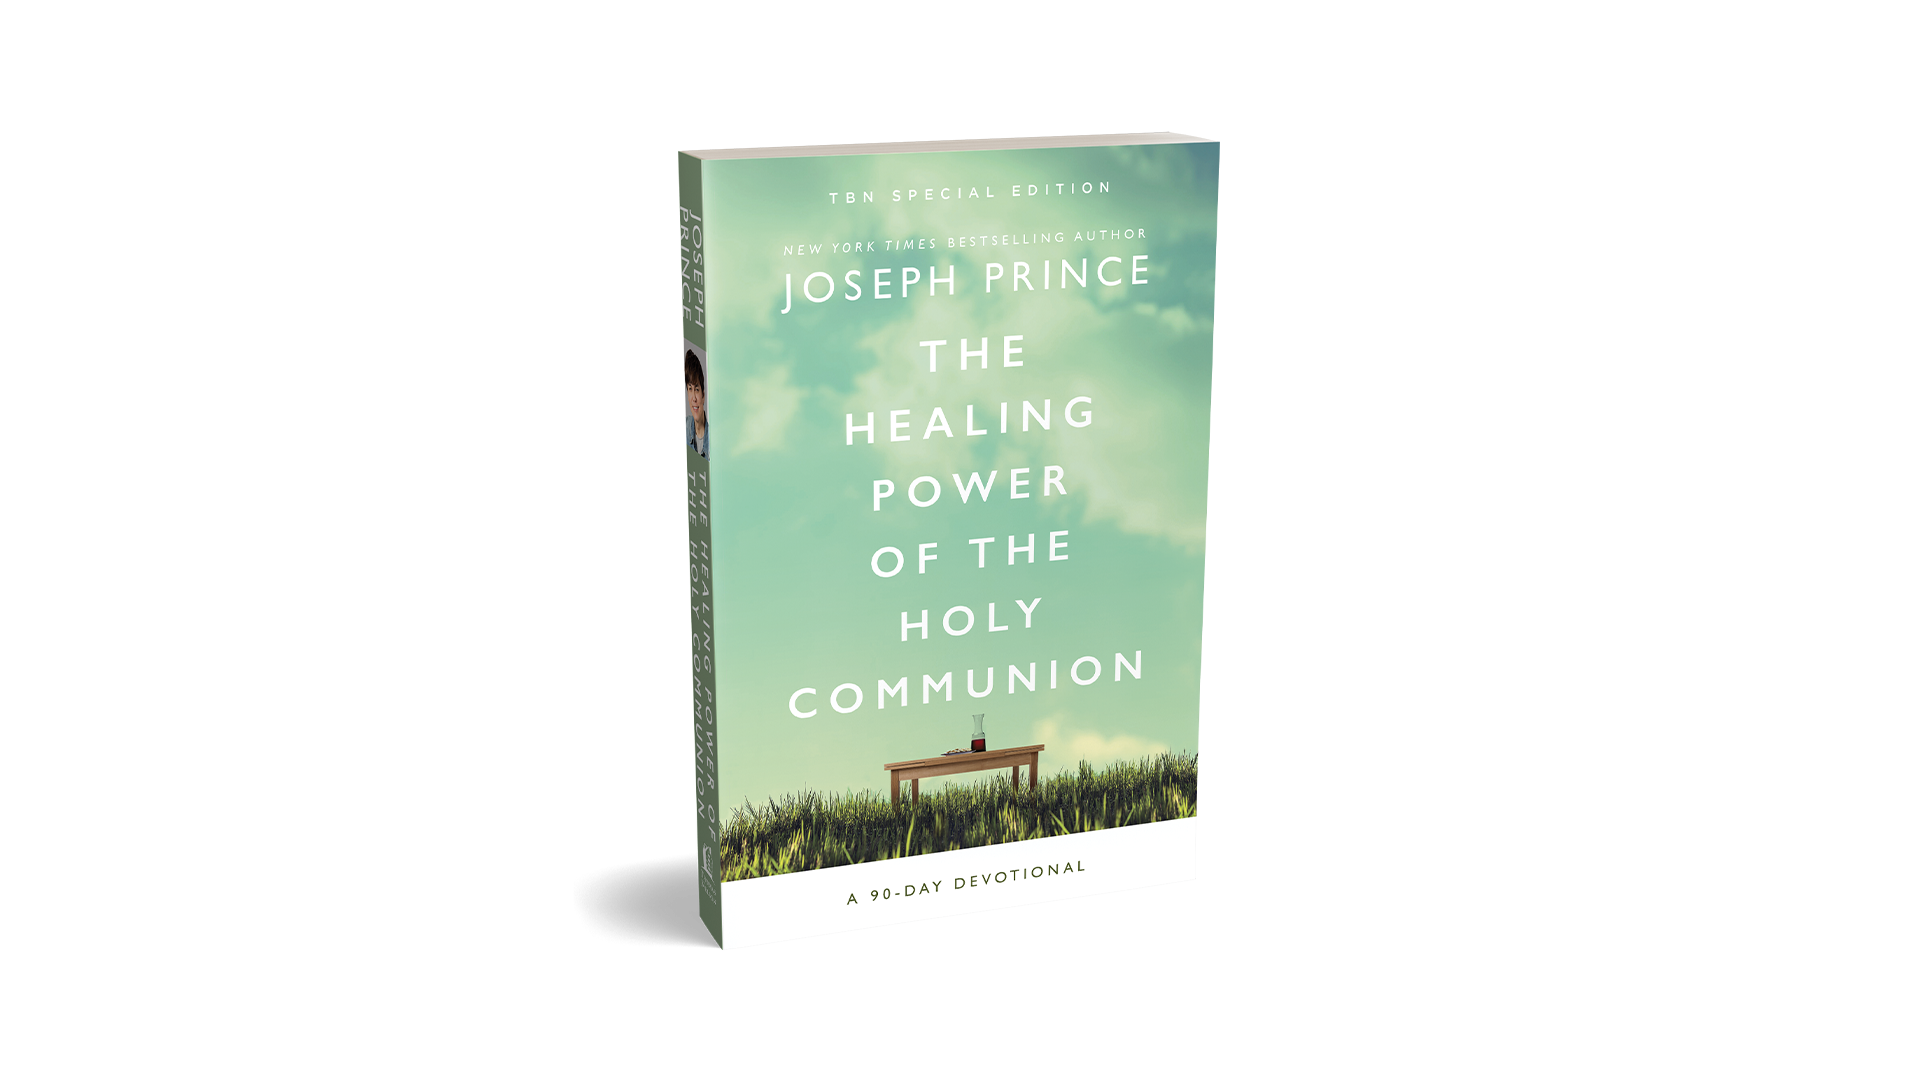 The Healing Power of the Holy Communion by Joseph Prince from TBN